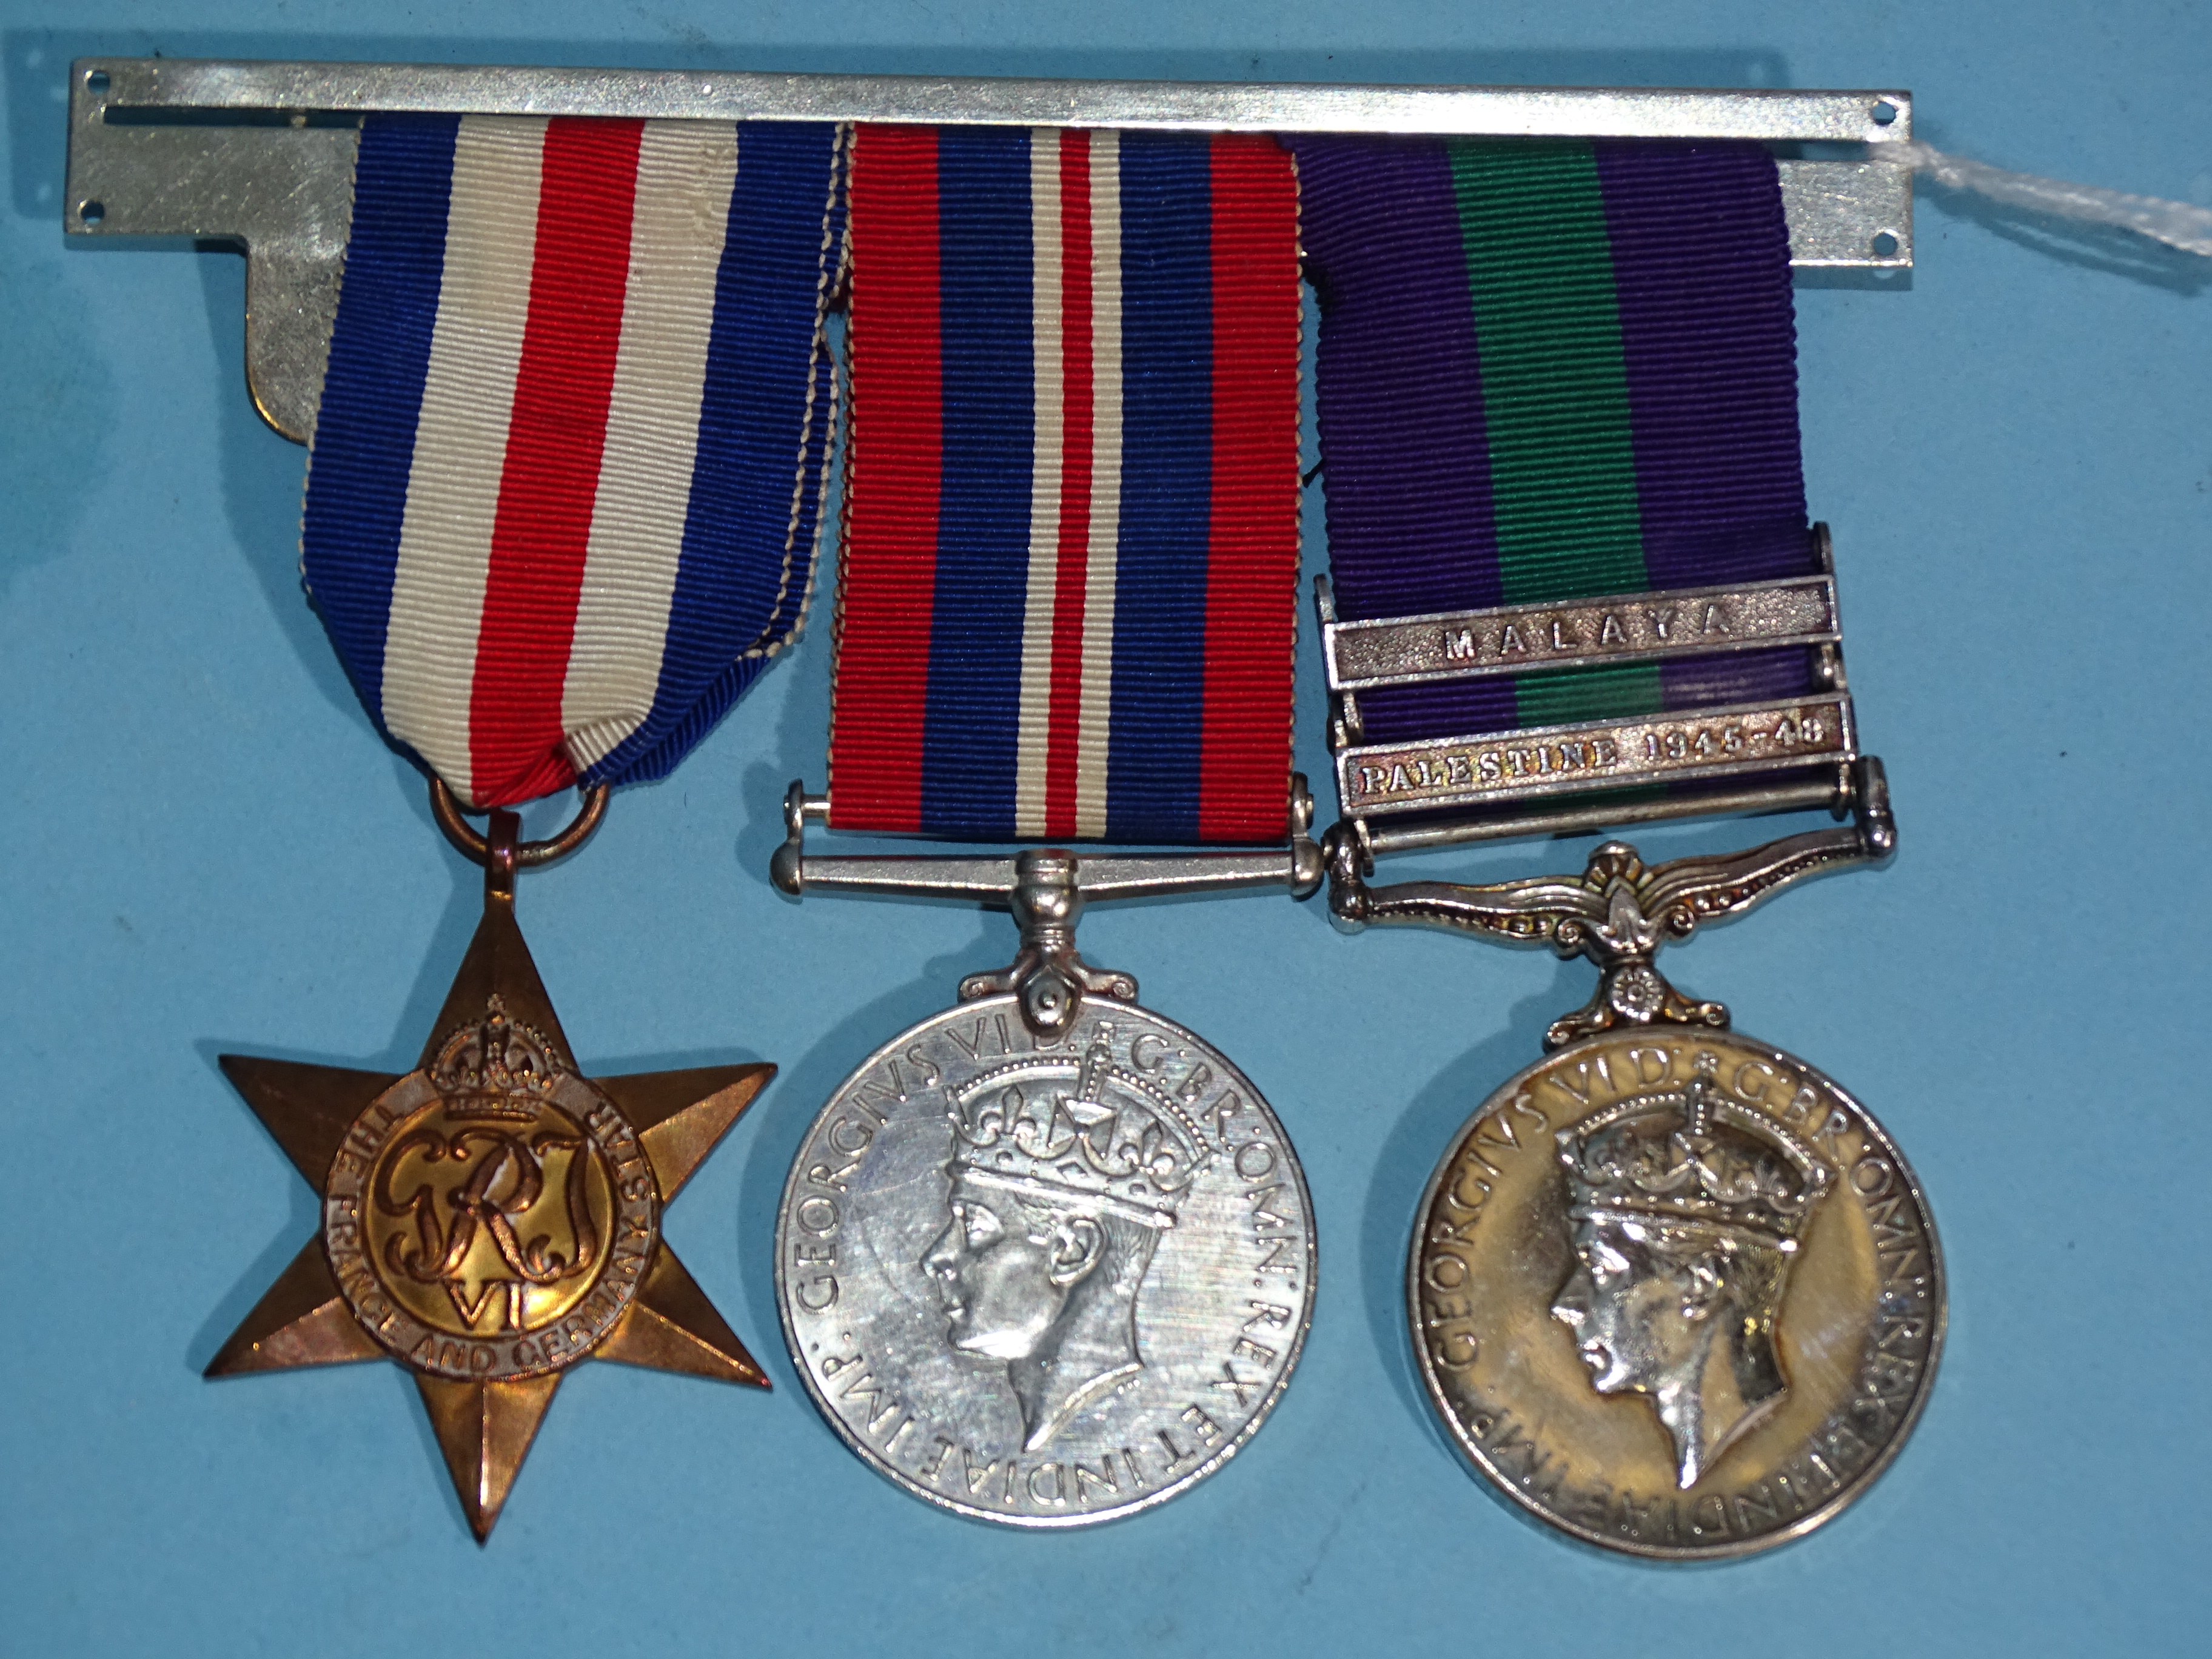 A WWII trio of medals awarded to 14809206 Pte J Stocker KSLI: France and Germany Star, 1939-45 War